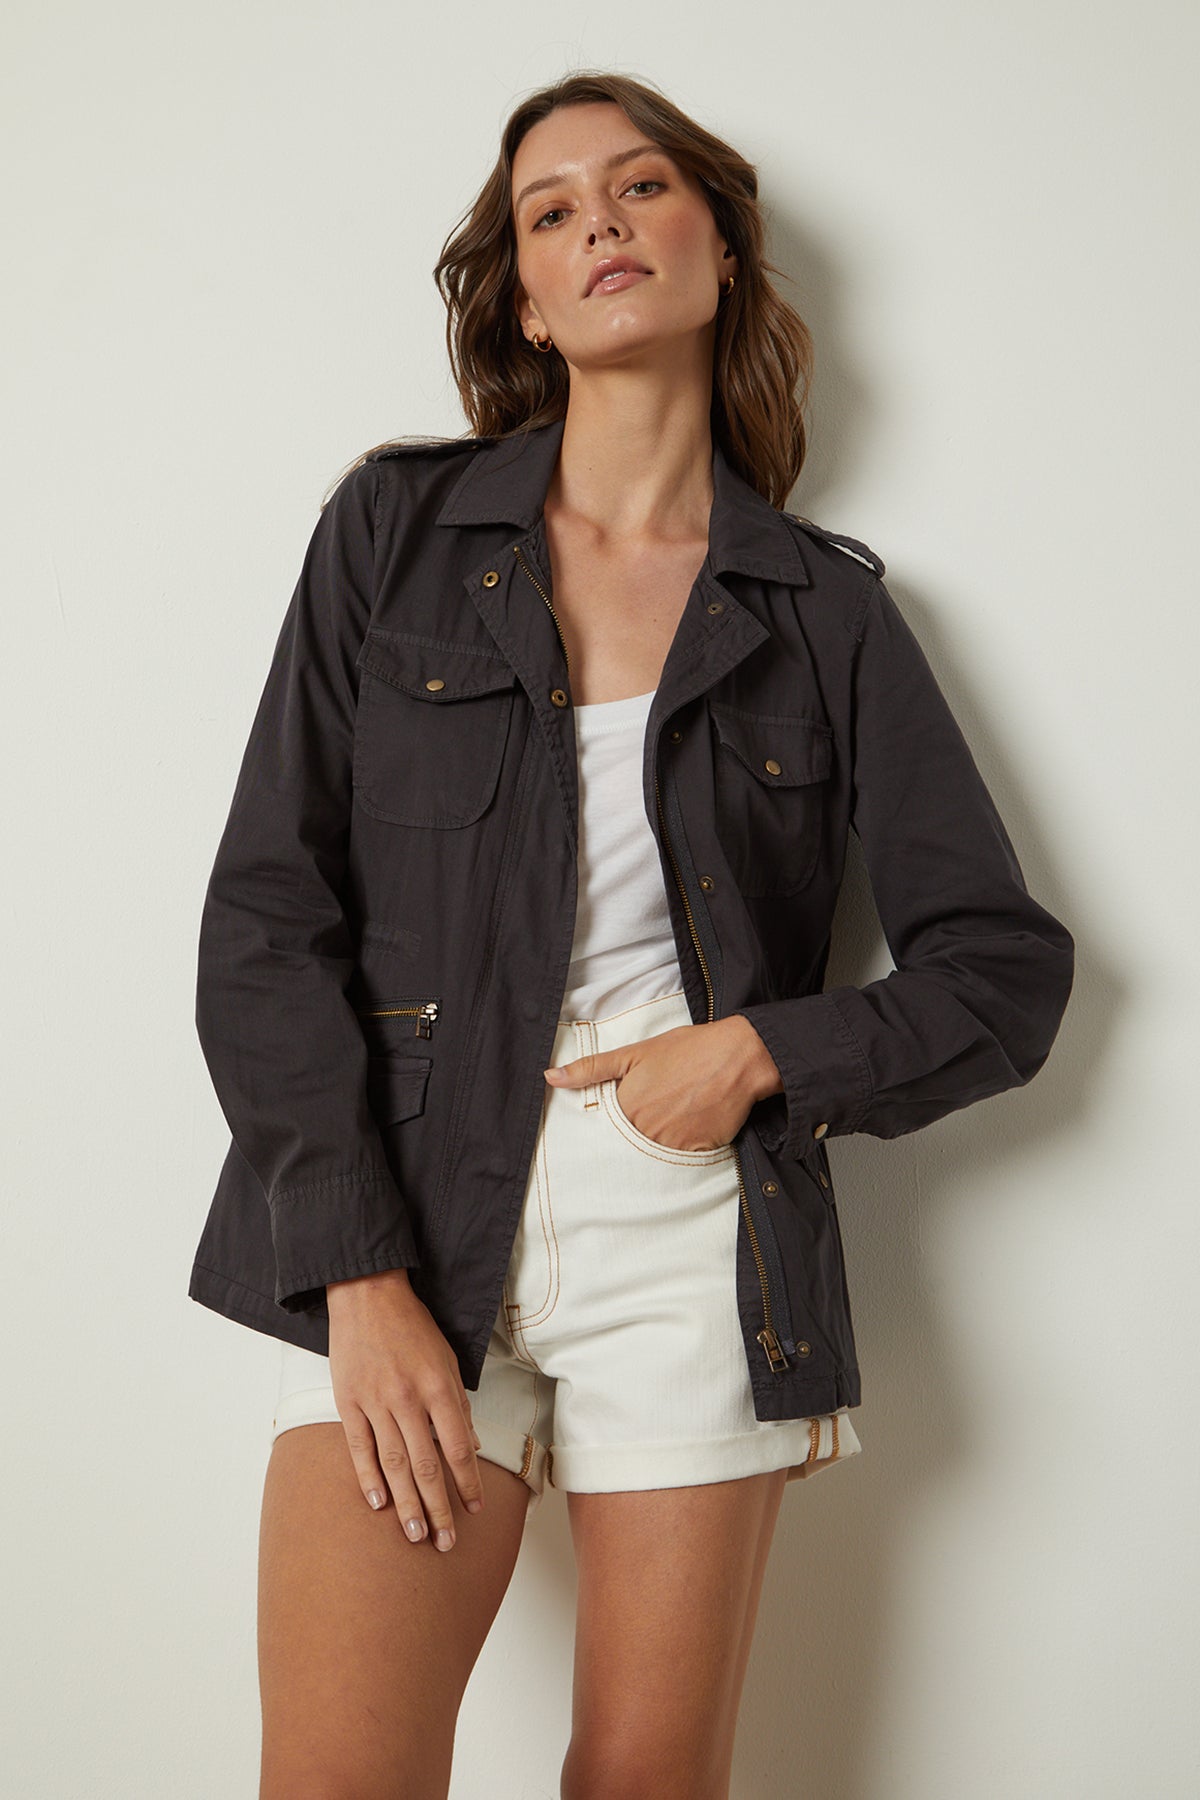 The model is wearing a Velvet by Graham & Spencer RUBY LIGHT-WEIGHT ARMY JACKET and white shorts.-26632087929025